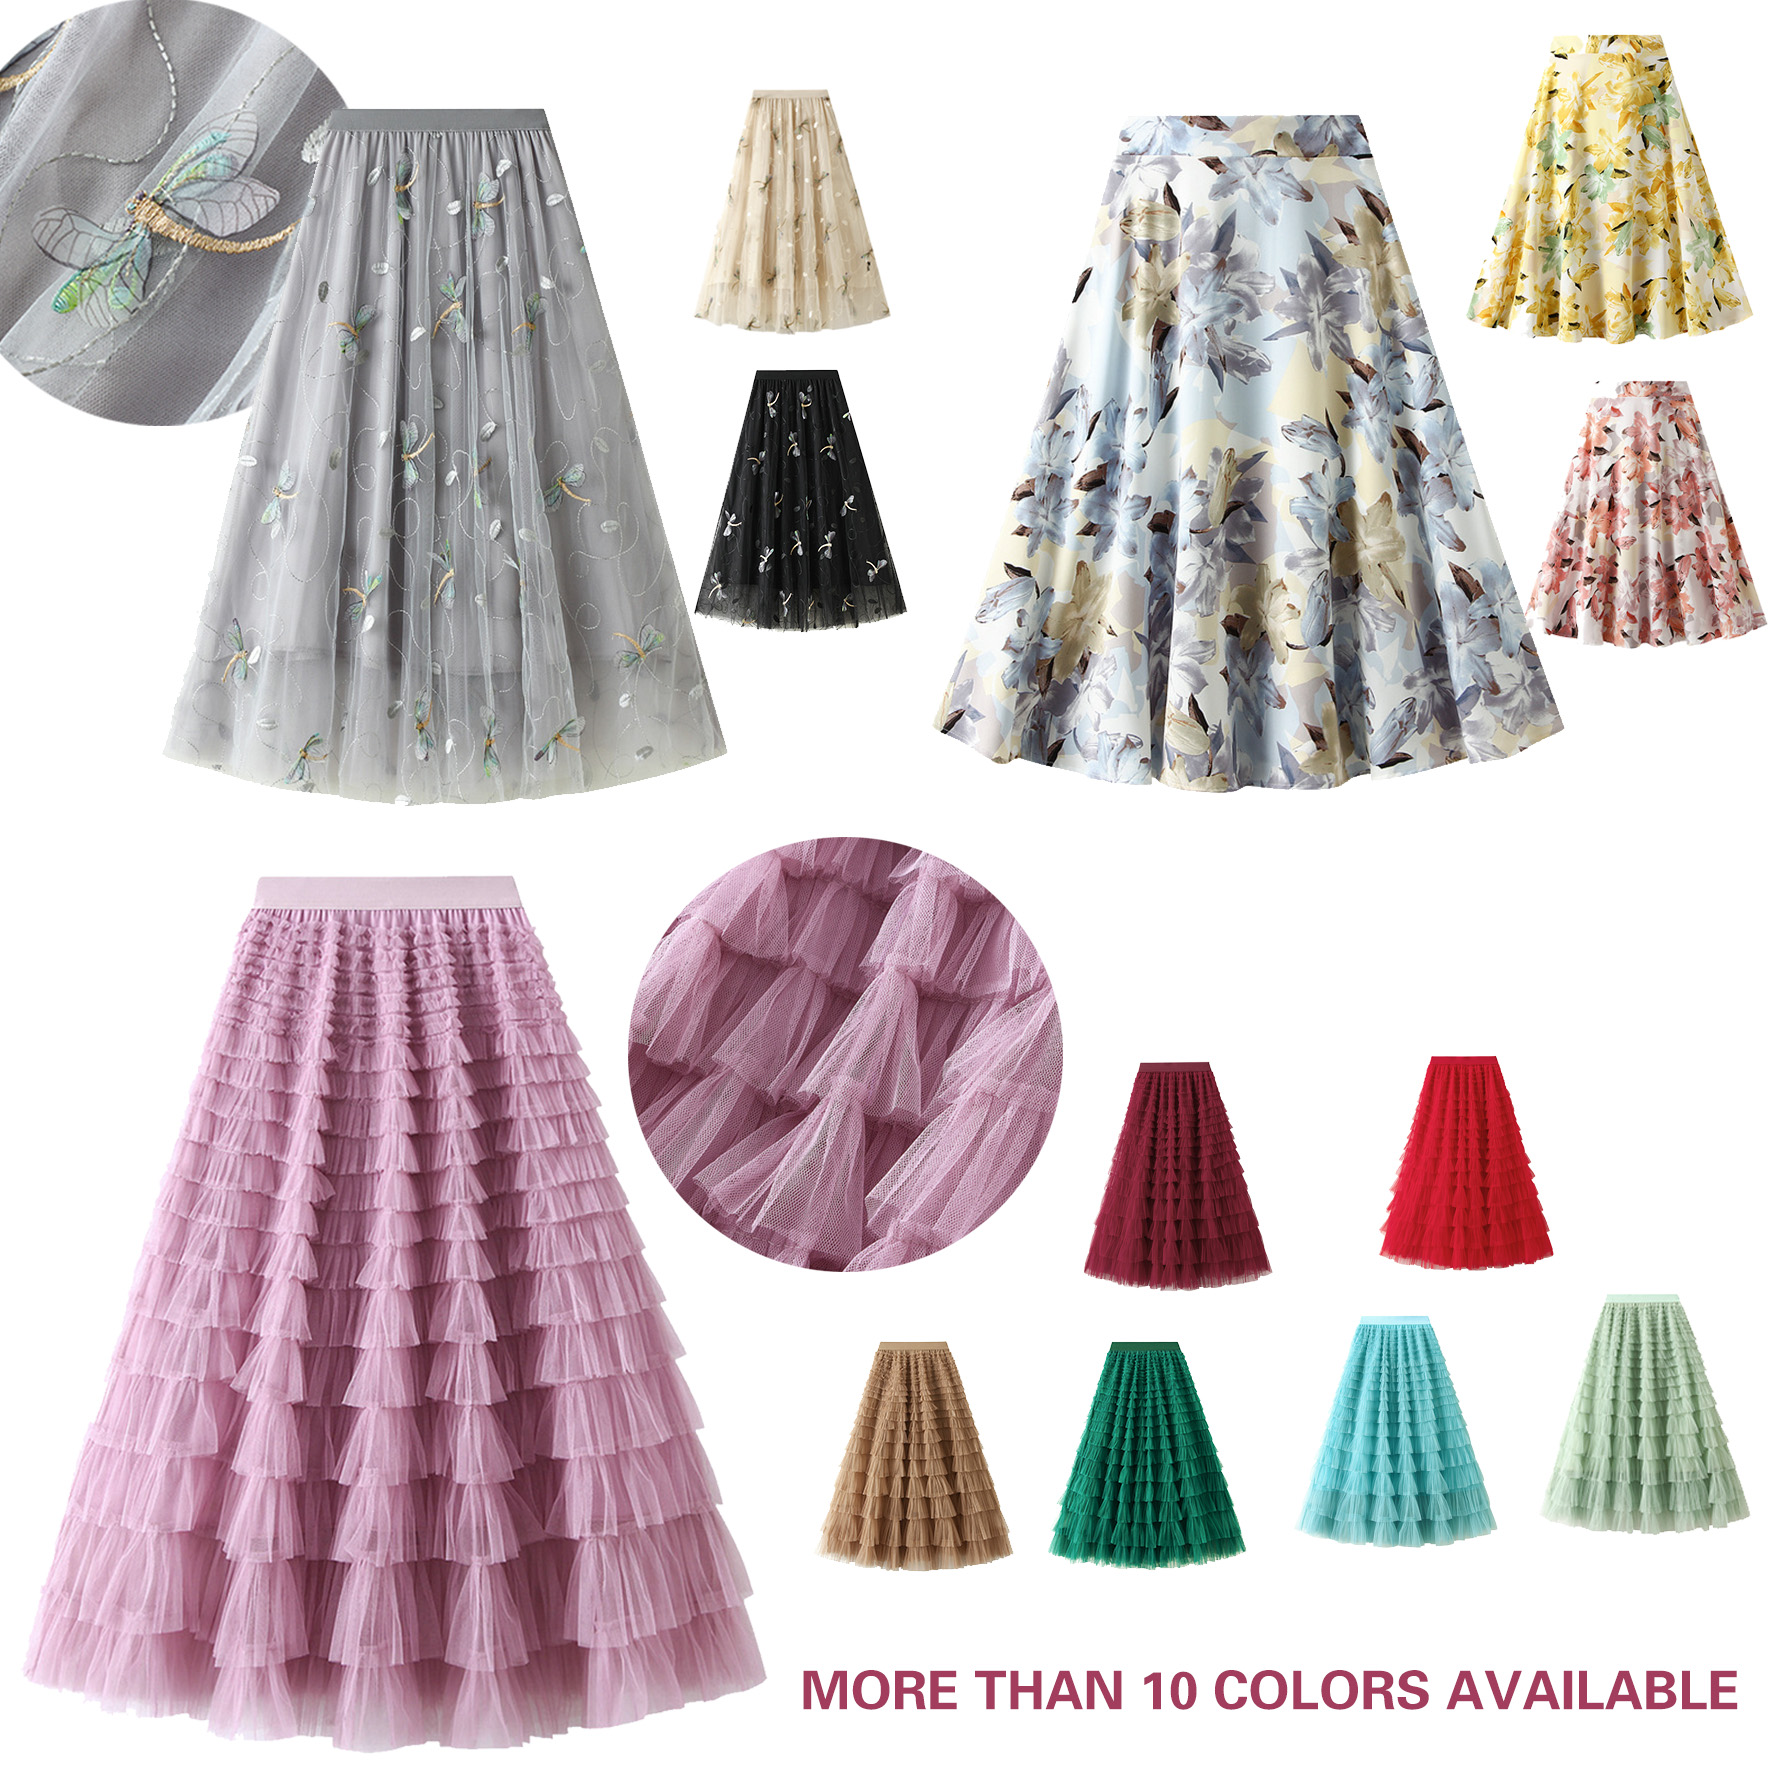 Women Skirts Fashion Tiered Skirt Multi Colors Tutu Skirtt A Line Designed Dress With Floral Decoration Elastic Waist Plus Size Fit All Sizes